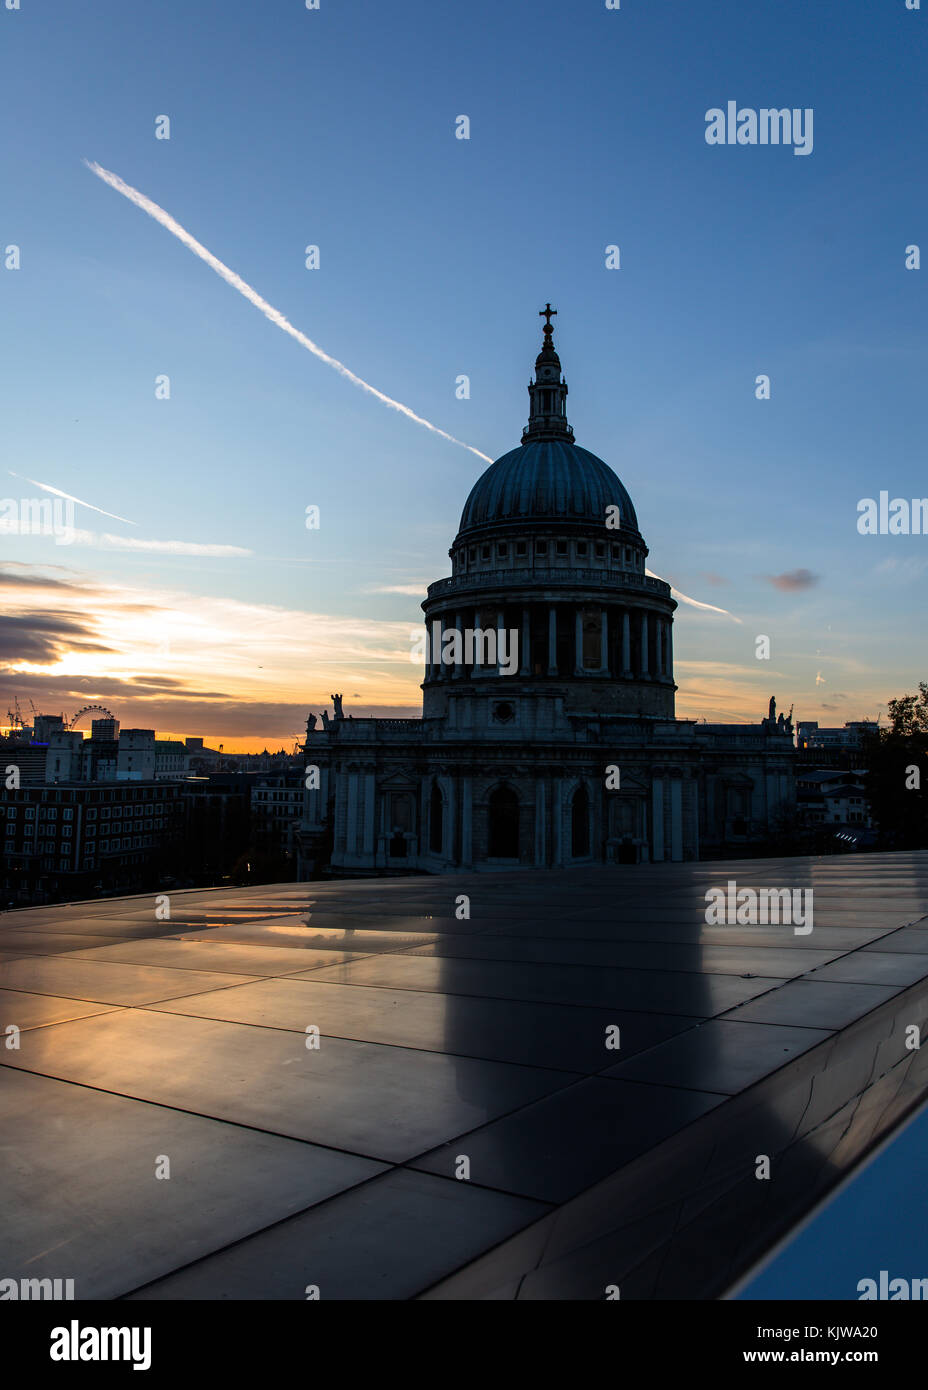 London, UK. 26th November, 2017. UK weather. Beautiful sunset on a cold, sunny winter day. View of St Paul's cathedral with reflection. Credit Carol Moir/Alamy Live News. Stock Photo